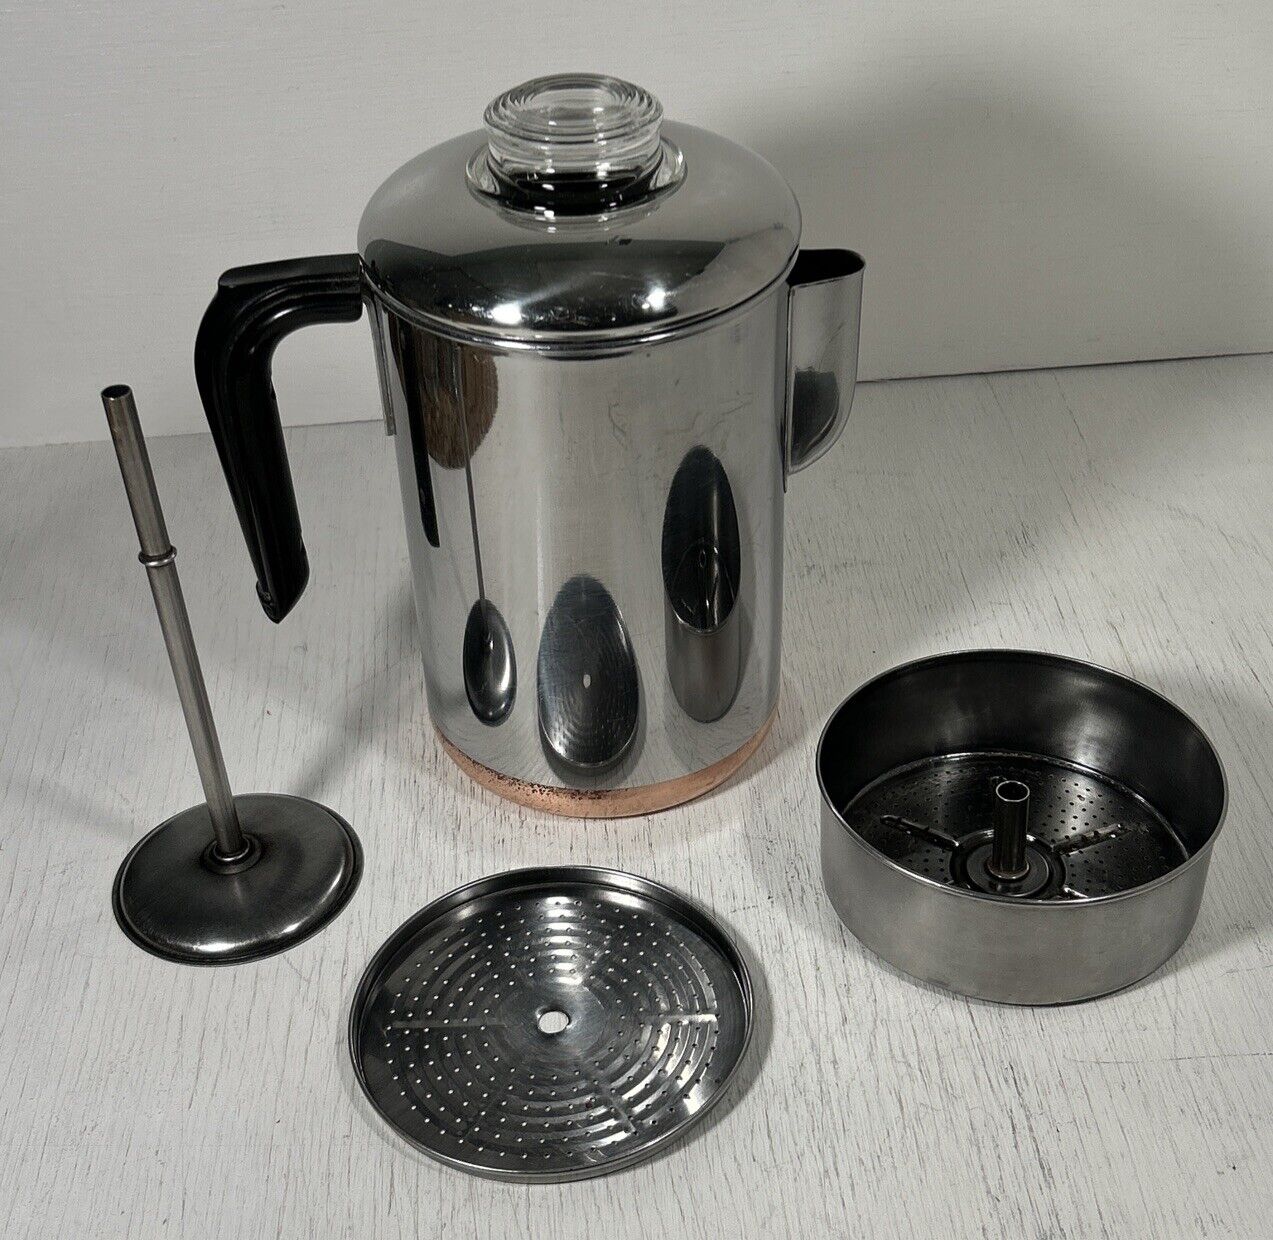 VTG Revere Ware Stainless Stovetop Coffee Pot Percolator Copper Bottom 6-8 Cup